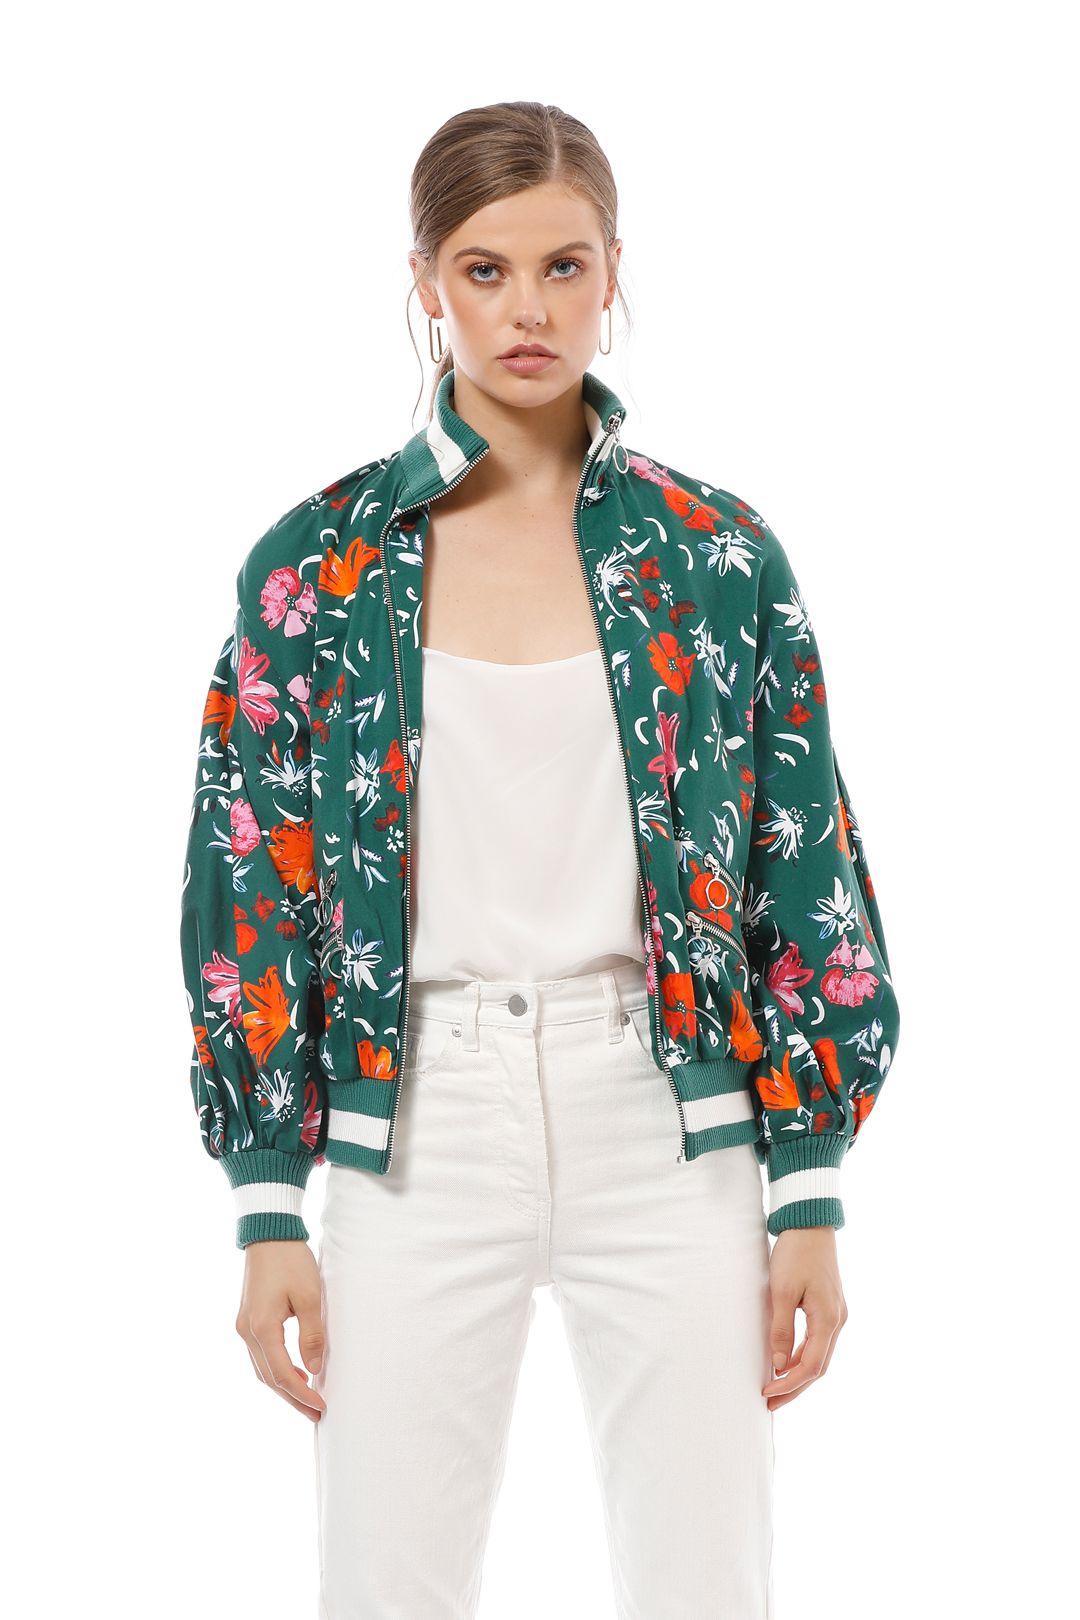 CMEO Collective - Elation Bomber - Green Floral - Close Up